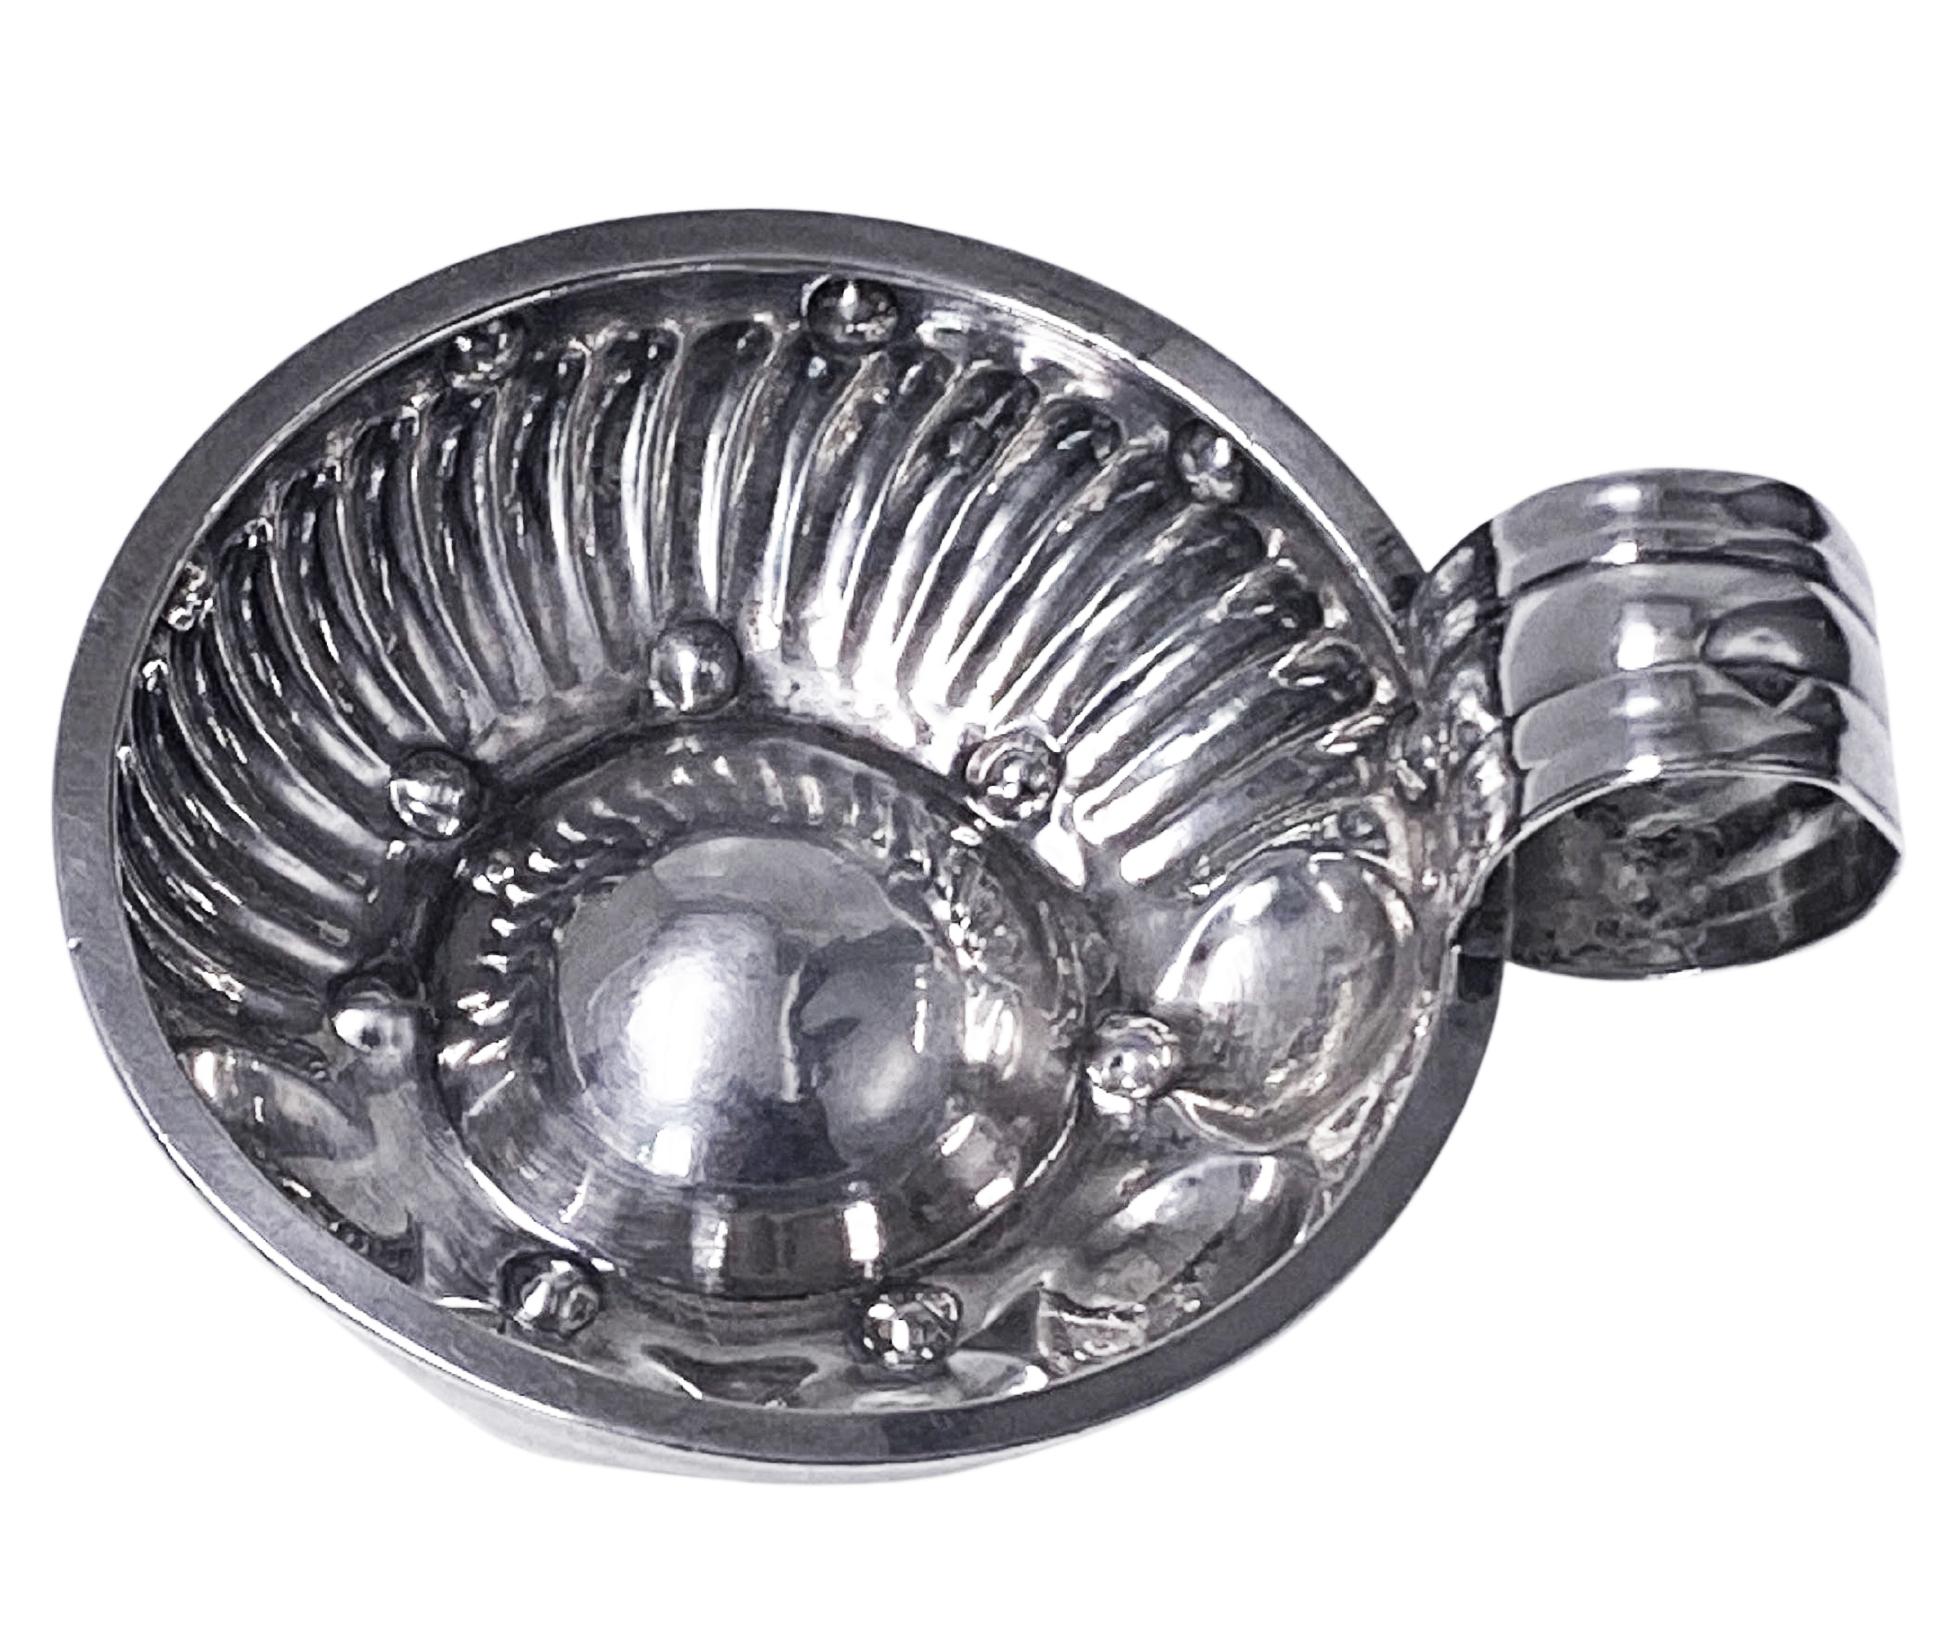 Antique French 1st std silver wine taster tastevin circa 1880, Cesar Tonnelier, Minerva head 1st std. The tastevin of usual form, the lower part of bowl with a surround of concave and swirl lobate style decoration, ribbed thumb piece handle. Marked